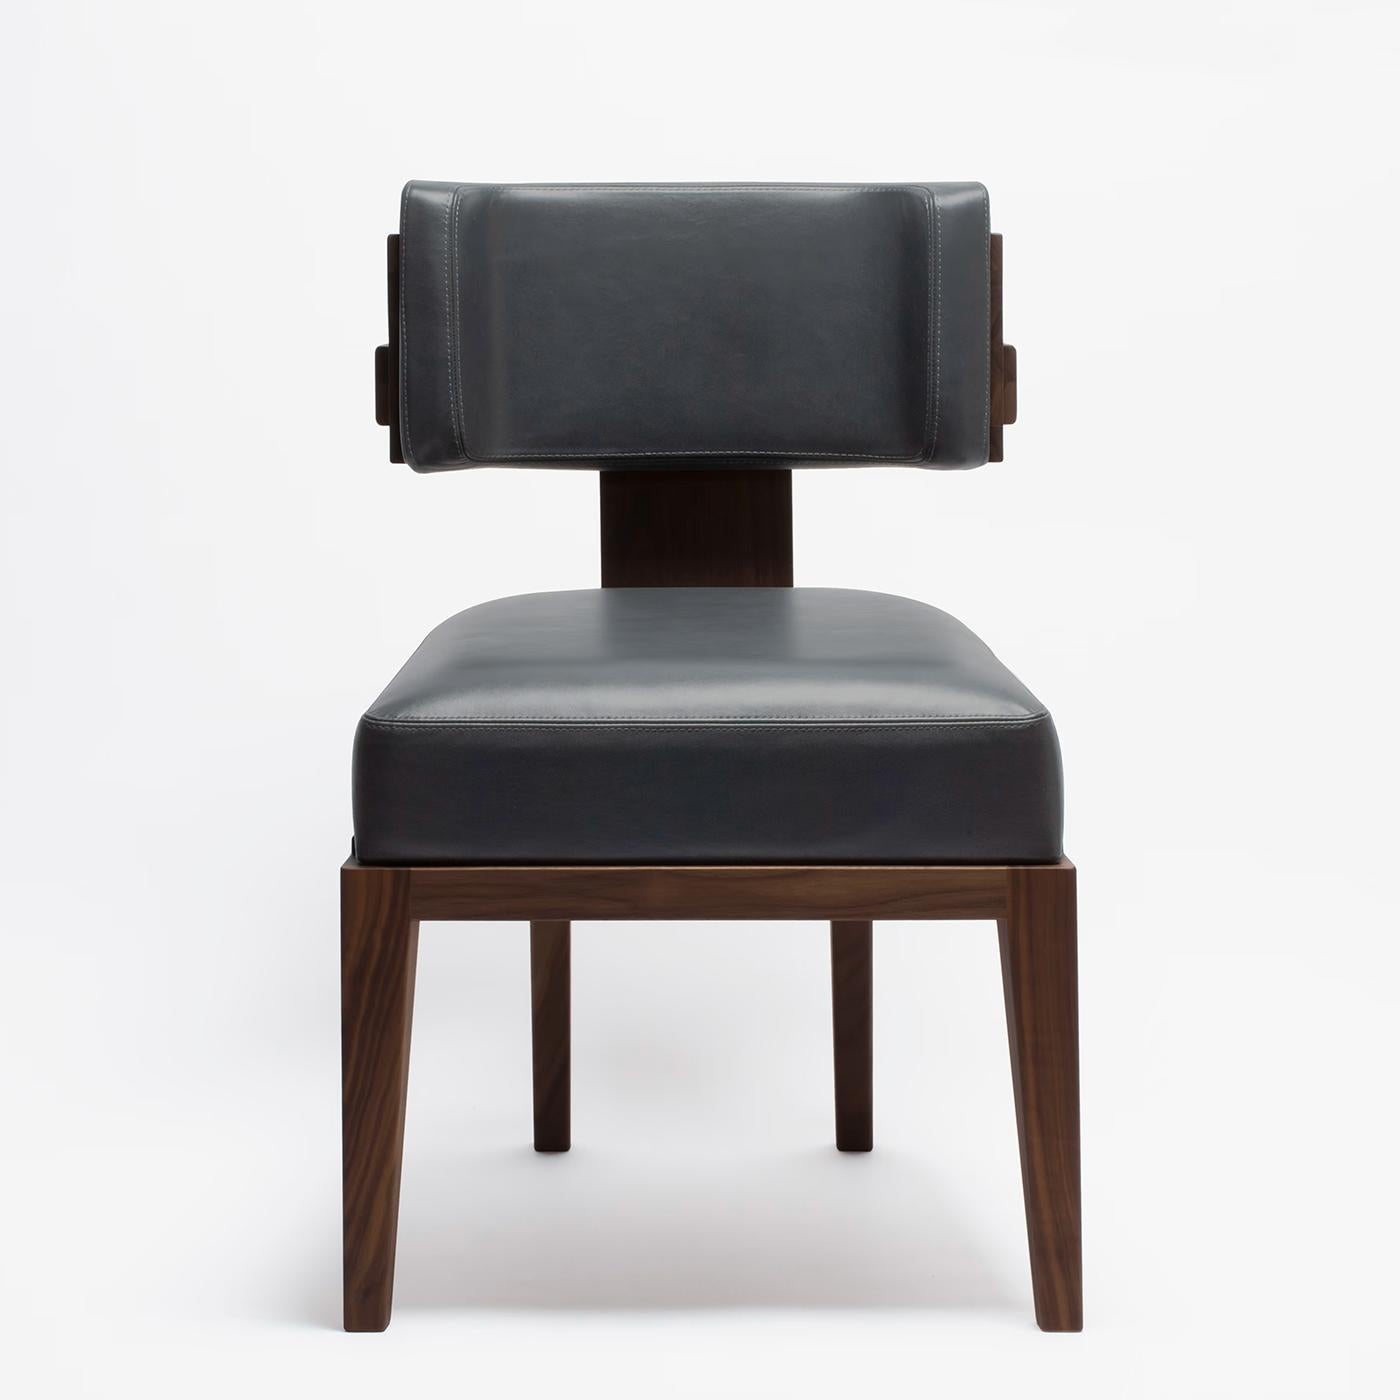 Chair Eloise walnut with solid walnut wood structure.
Upholstered and covered with high quality genuine. 
Black leather.